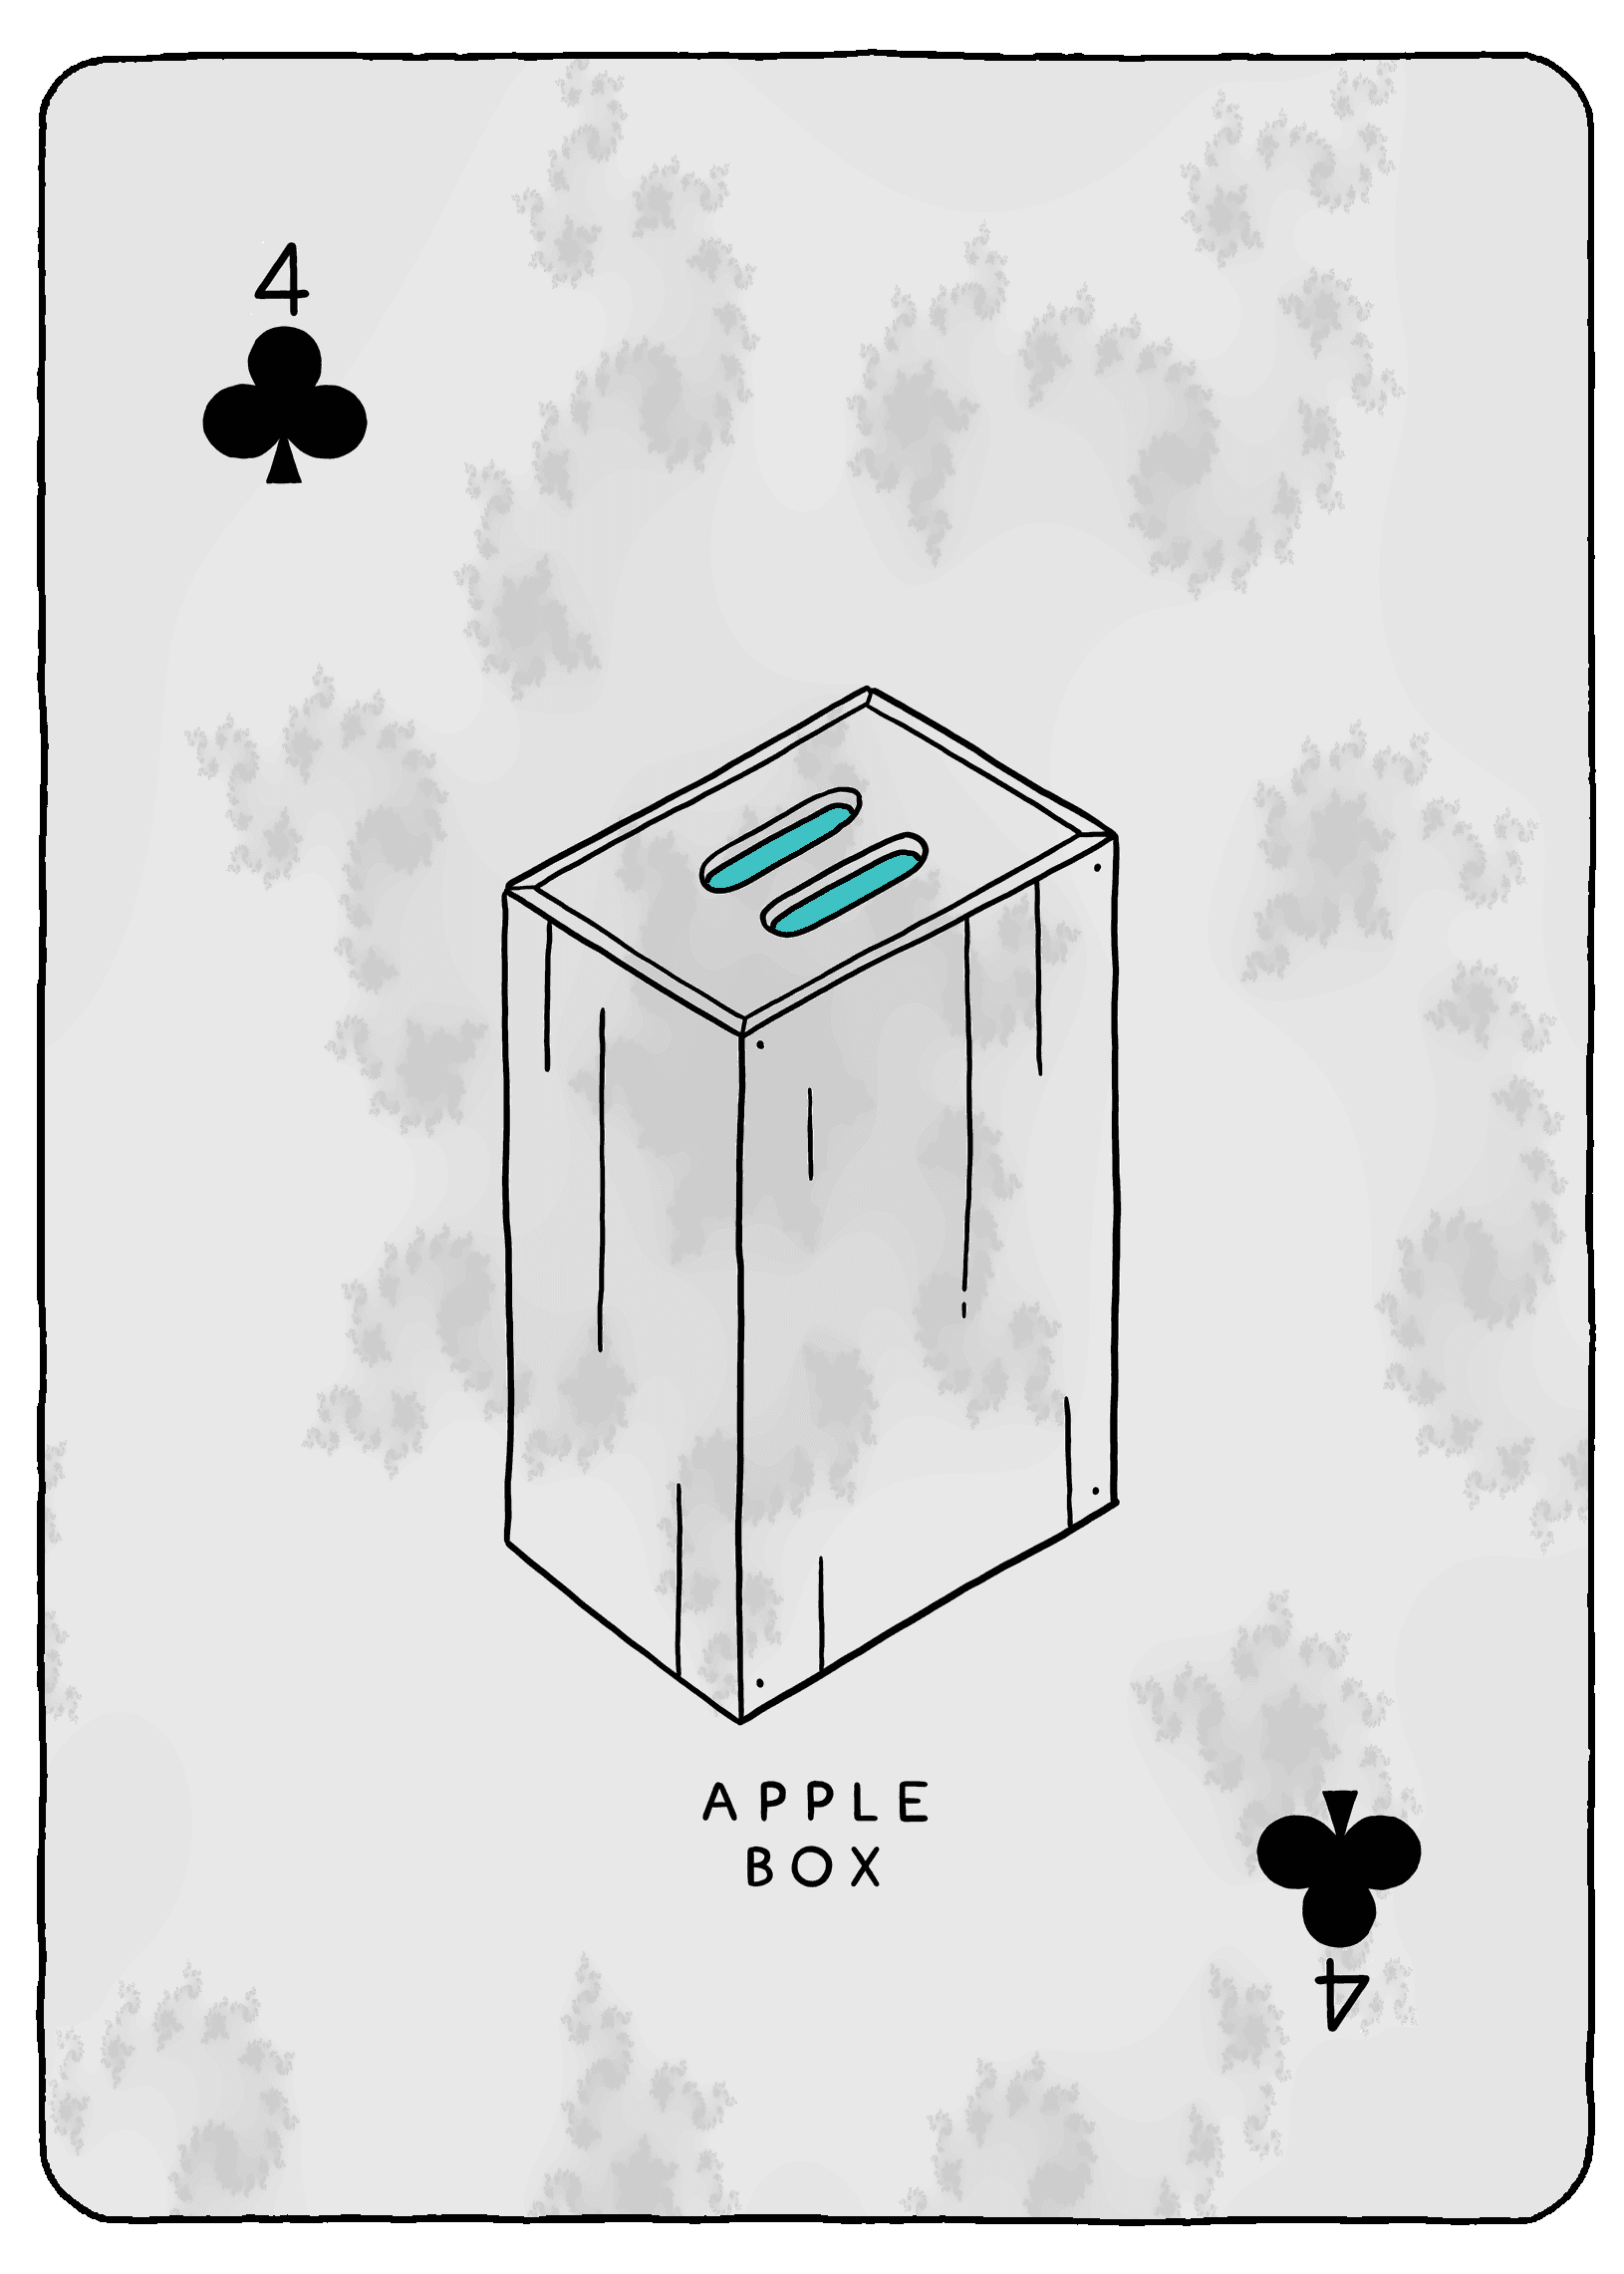 Apple Box - 4 of Clubs - Deck 6 - #330